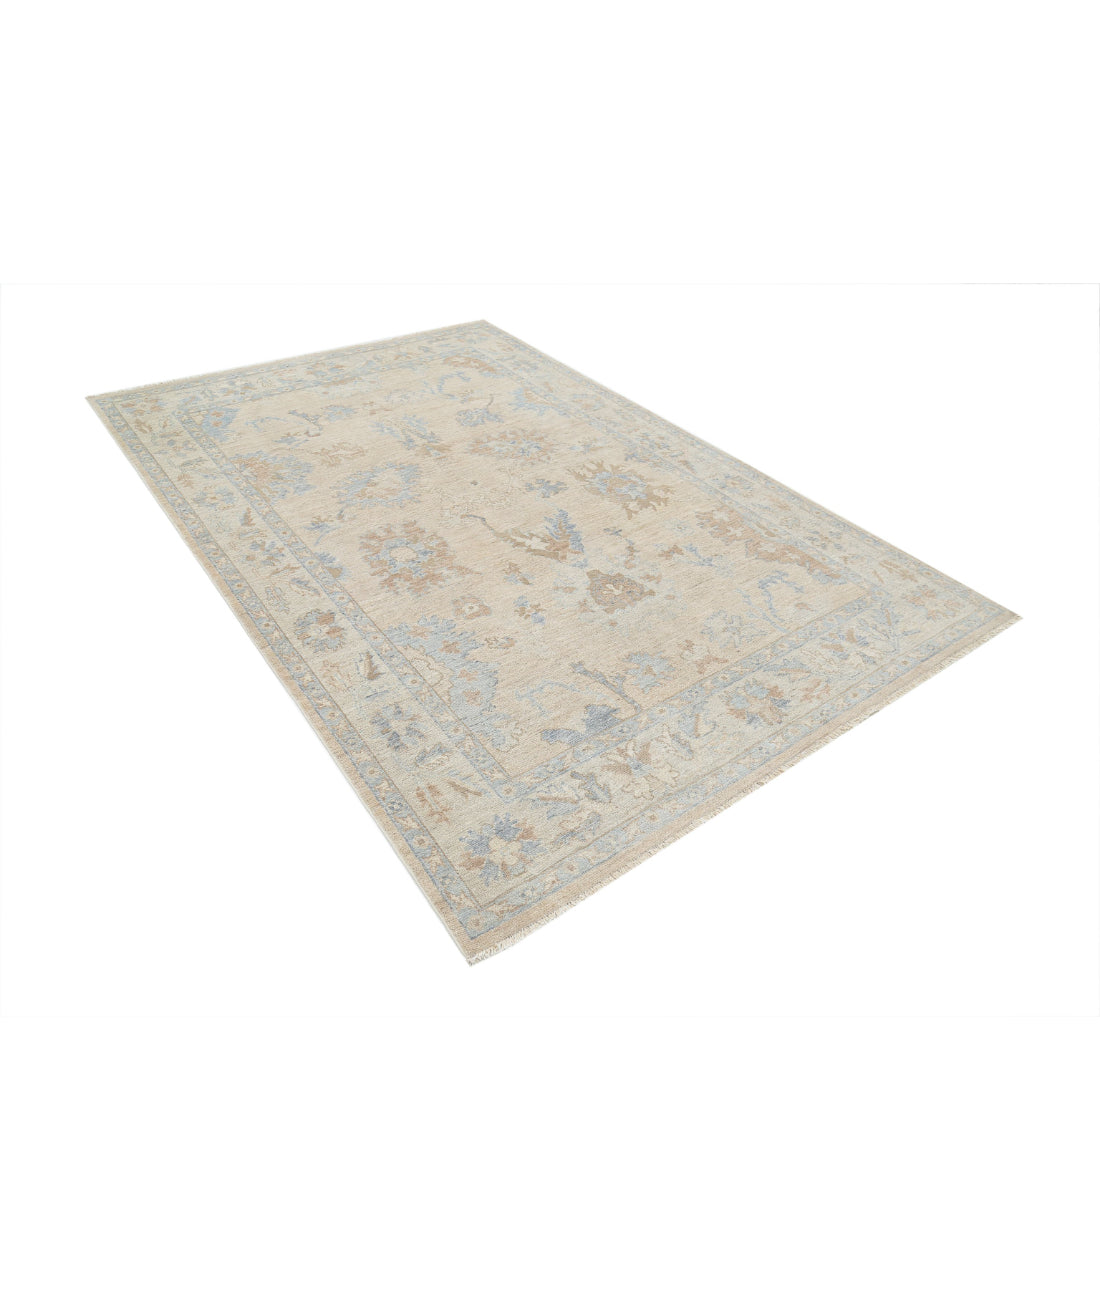 Hand Knotted Oushak Wool Rug - 5'9'' x 8'9'' 5'9'' x 8'9'' (173 X 263) / Taupe / Beige